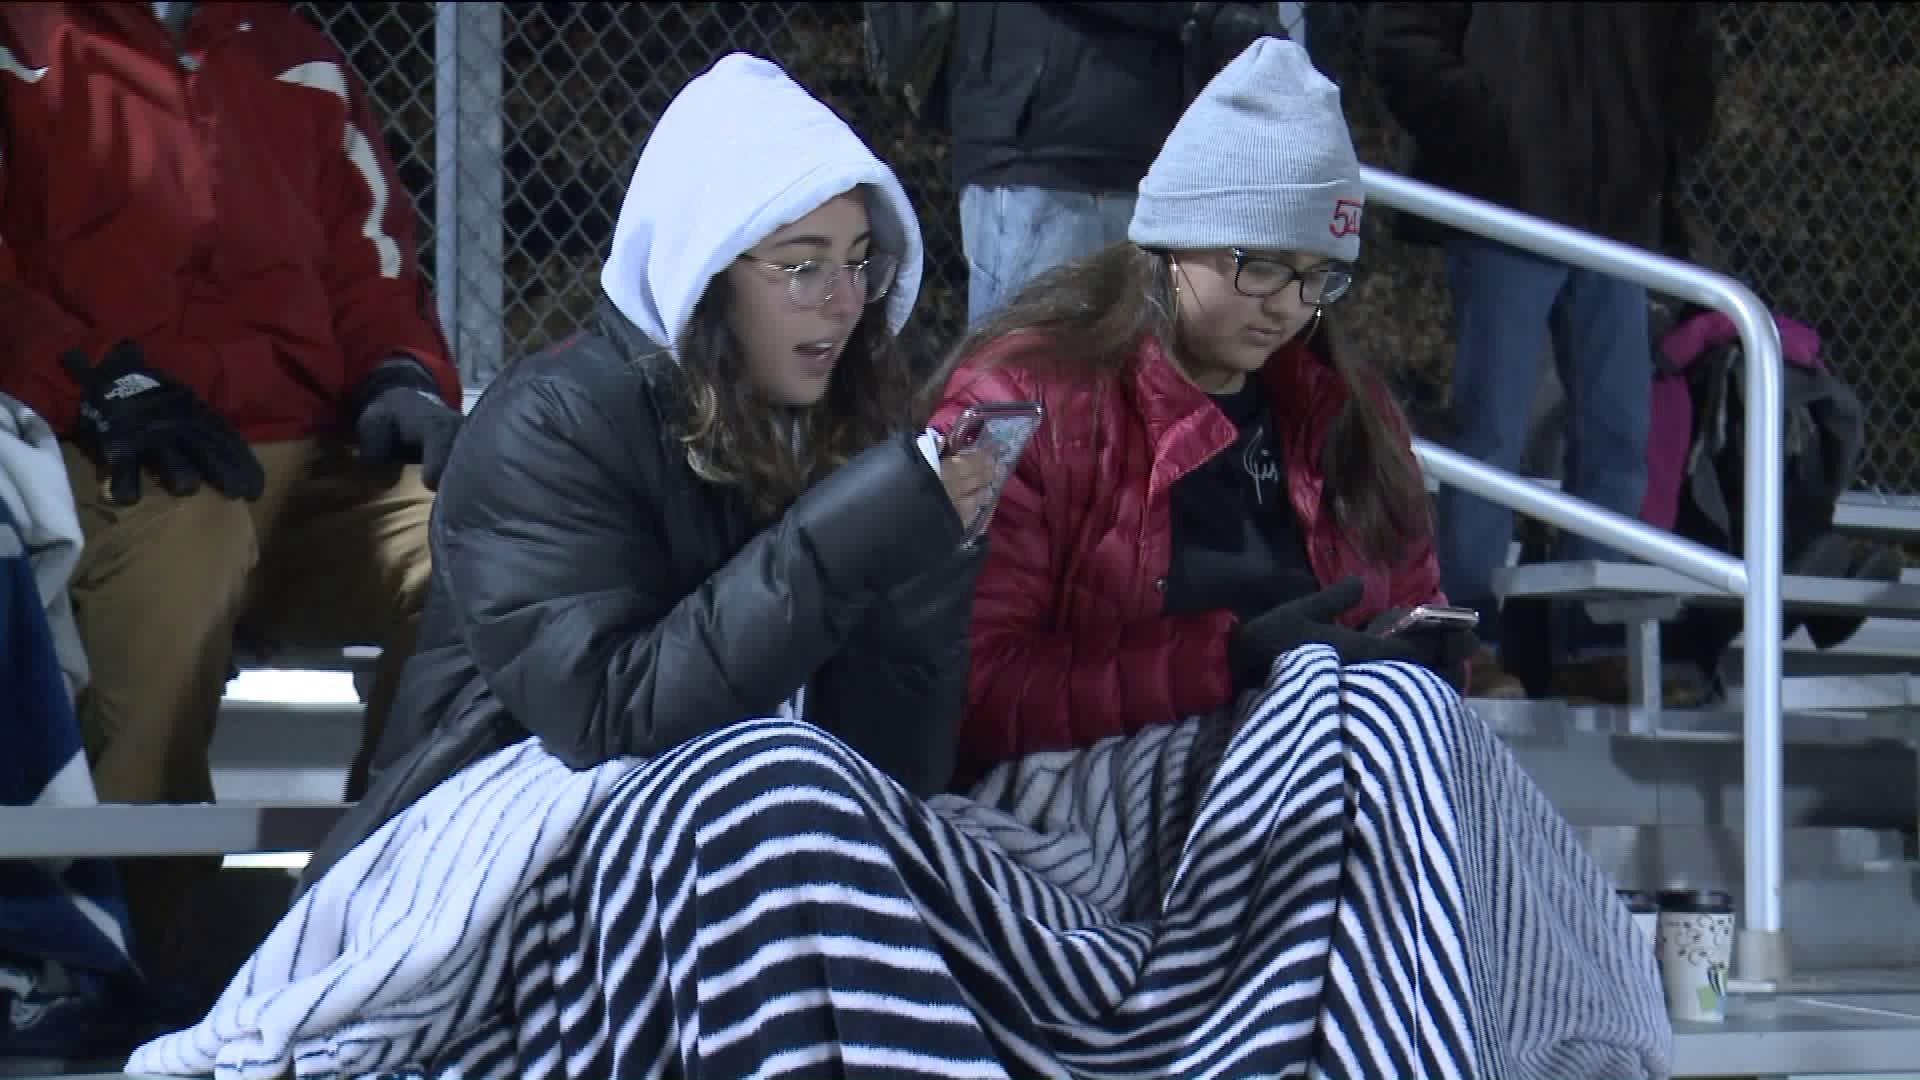 Fans brace cold, try to stay warm at Wethersfield girls soccer playoffs